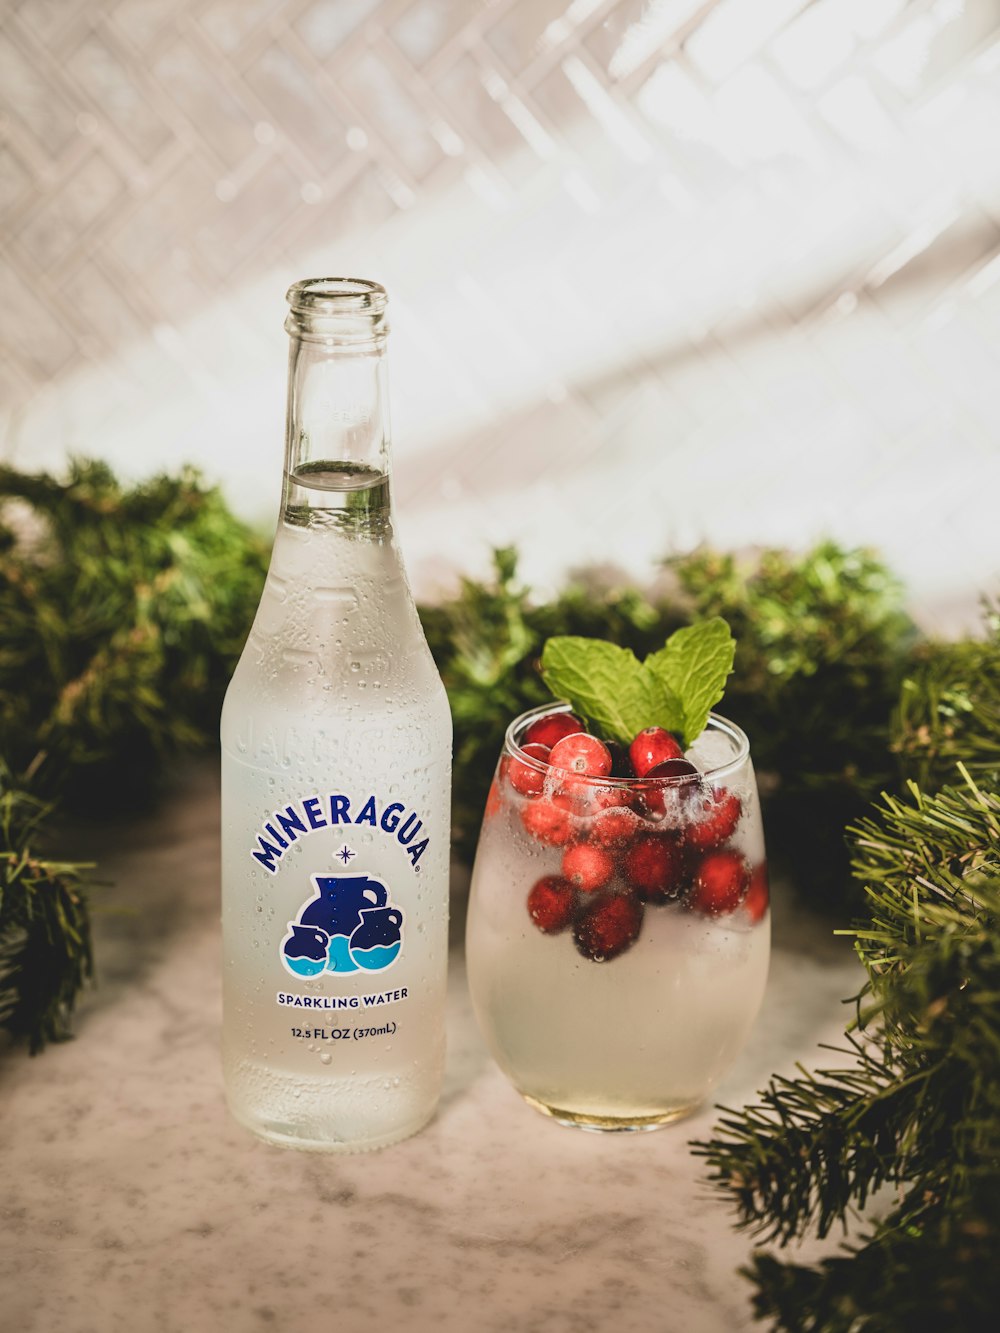 a bottle of mineral water next to a glass filled with berries